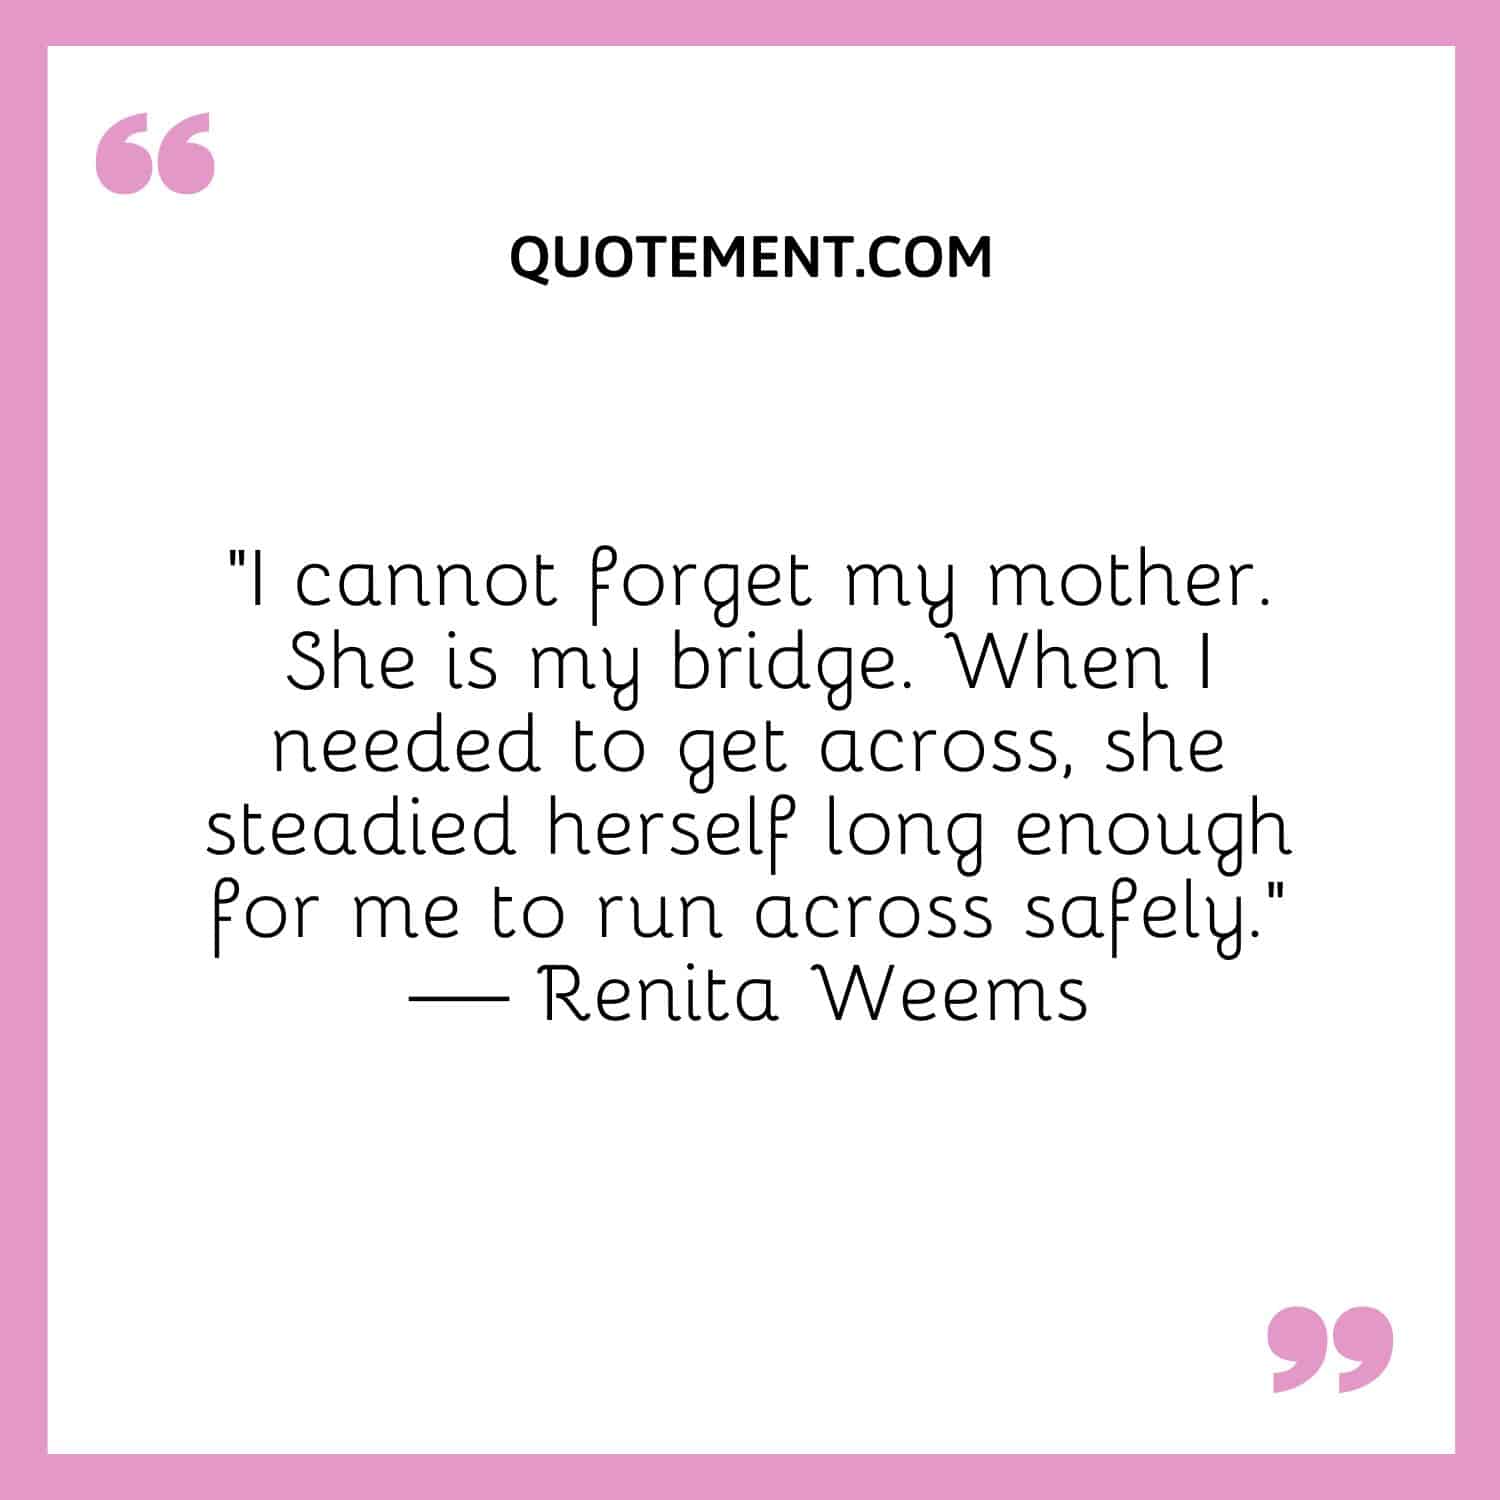 I cannot forget my mother